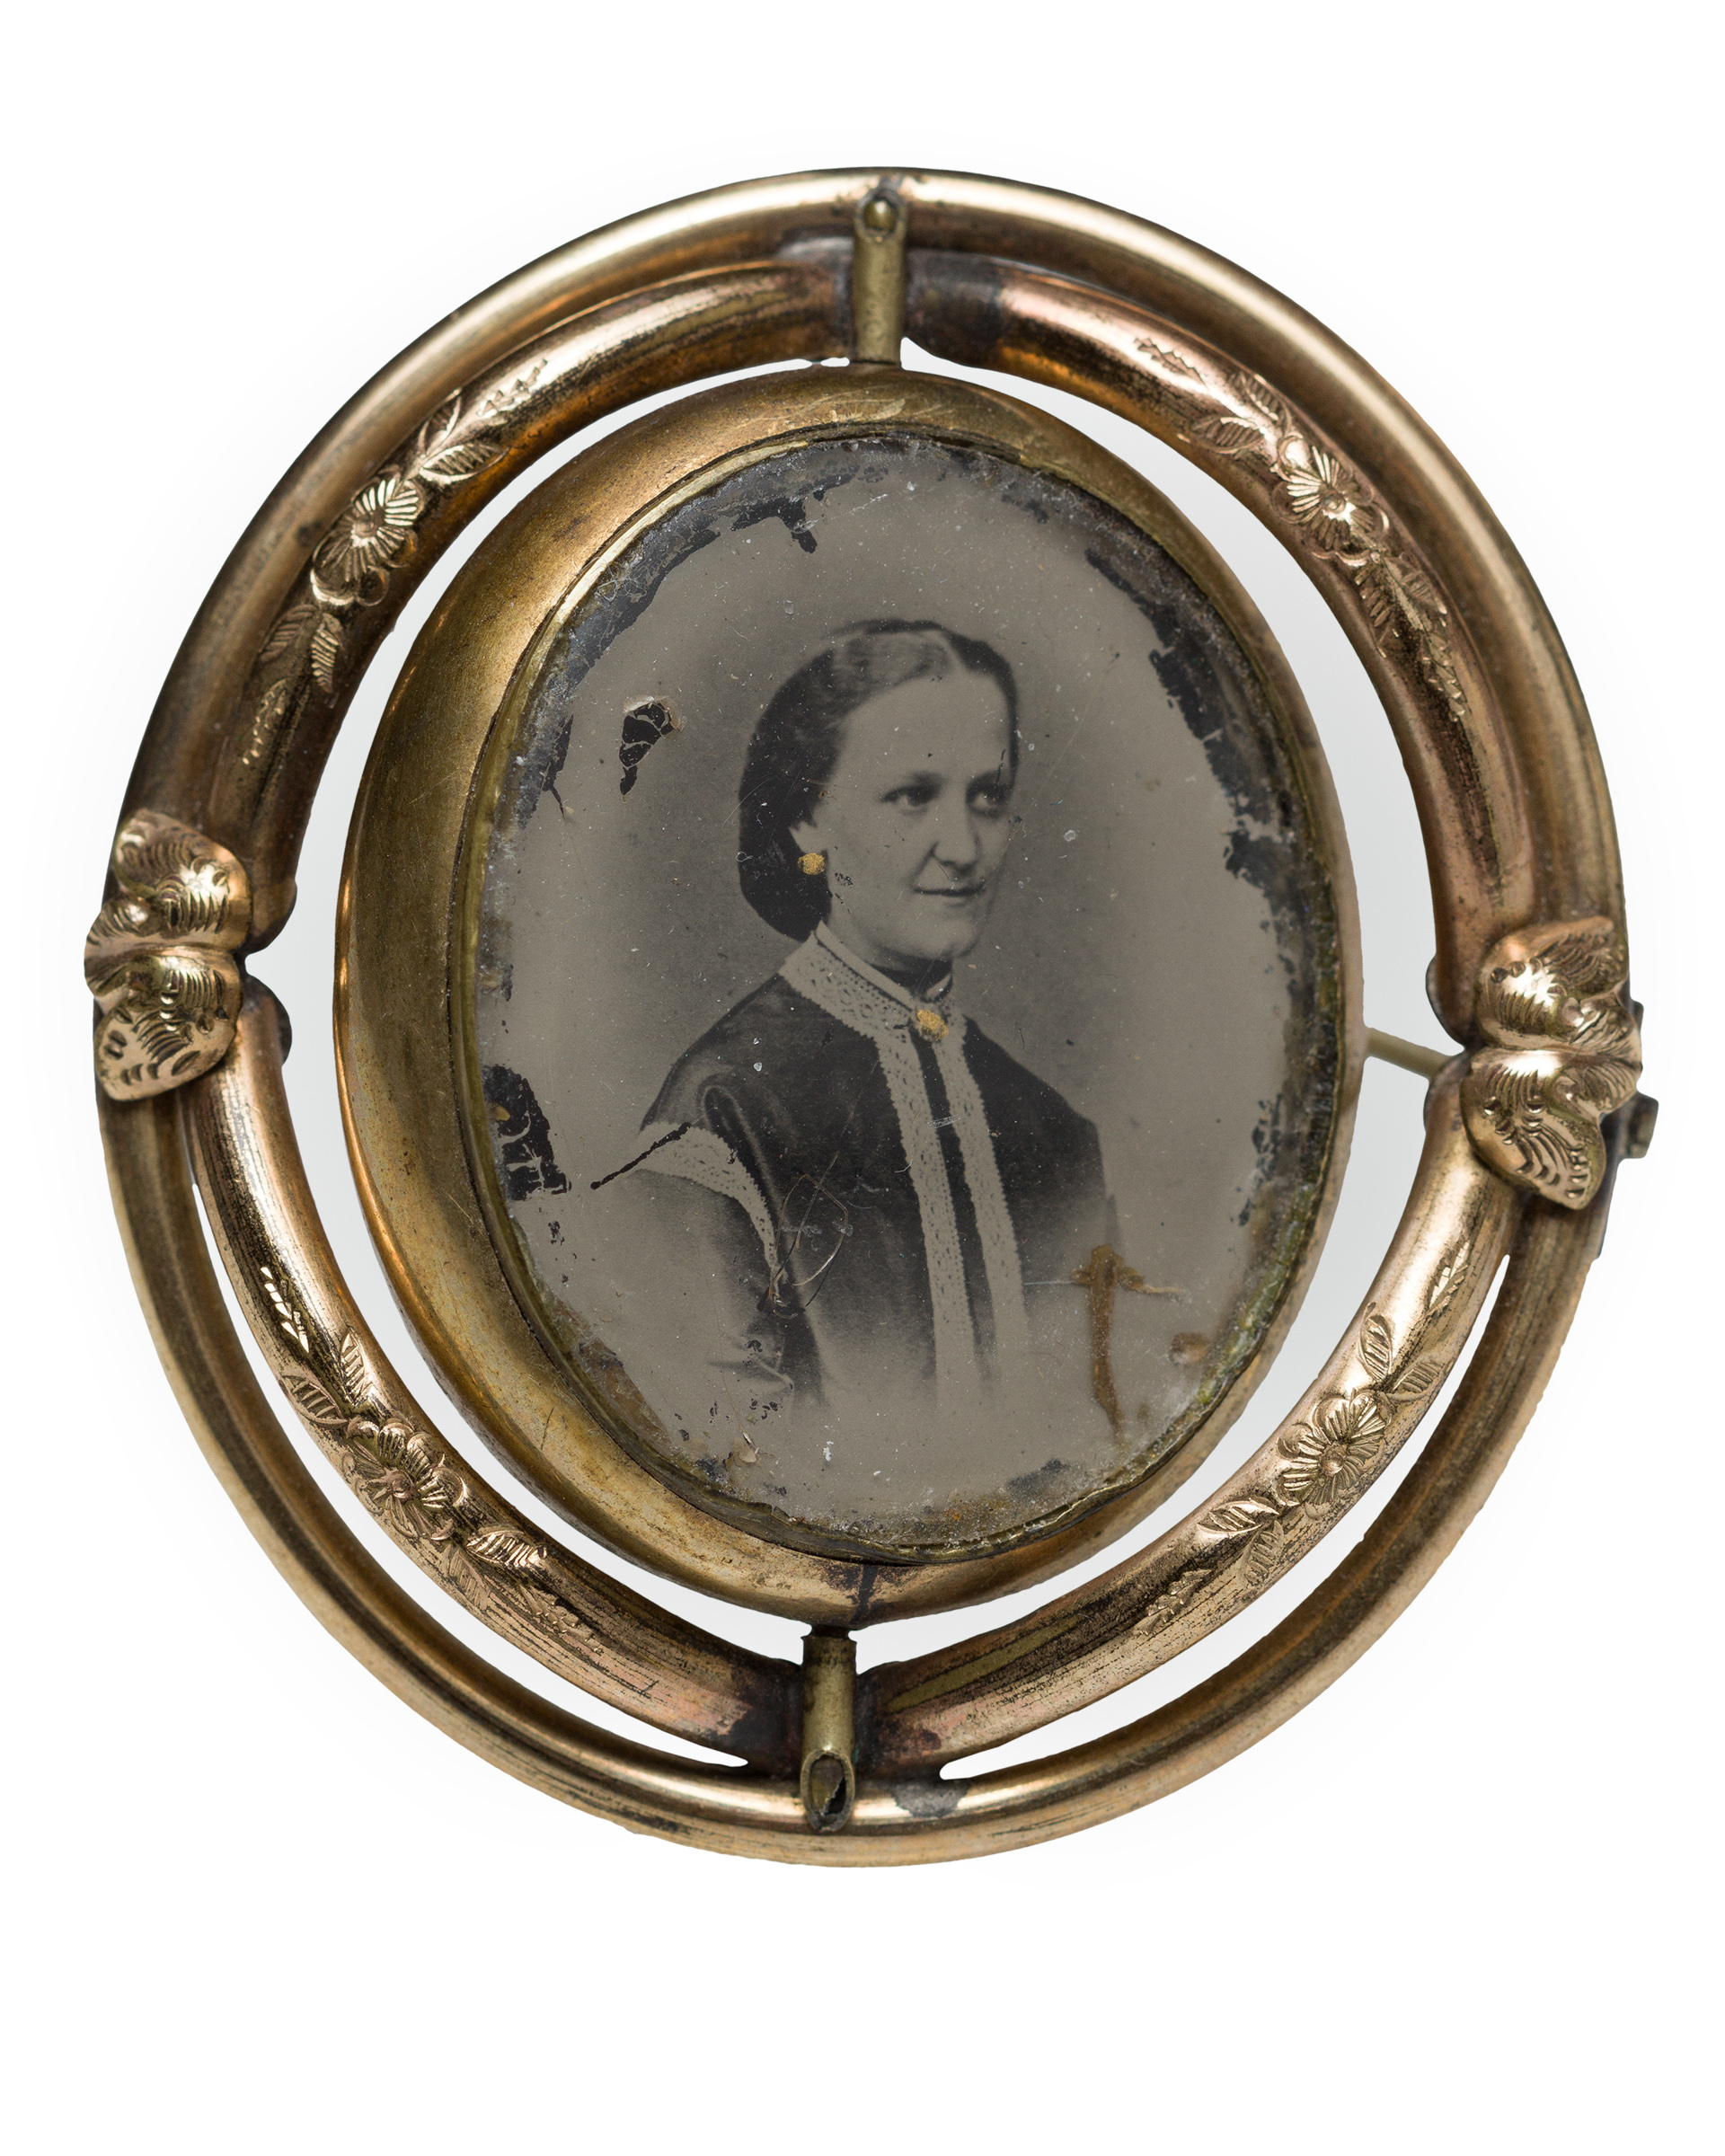 Unidentified photographer, [Double-sided brooch with photographic portrait and floral motif], [date unknown] (brass, dried flowers, tintype). Courtesy of the Howard and Carole Tanenbaum Photography Collection